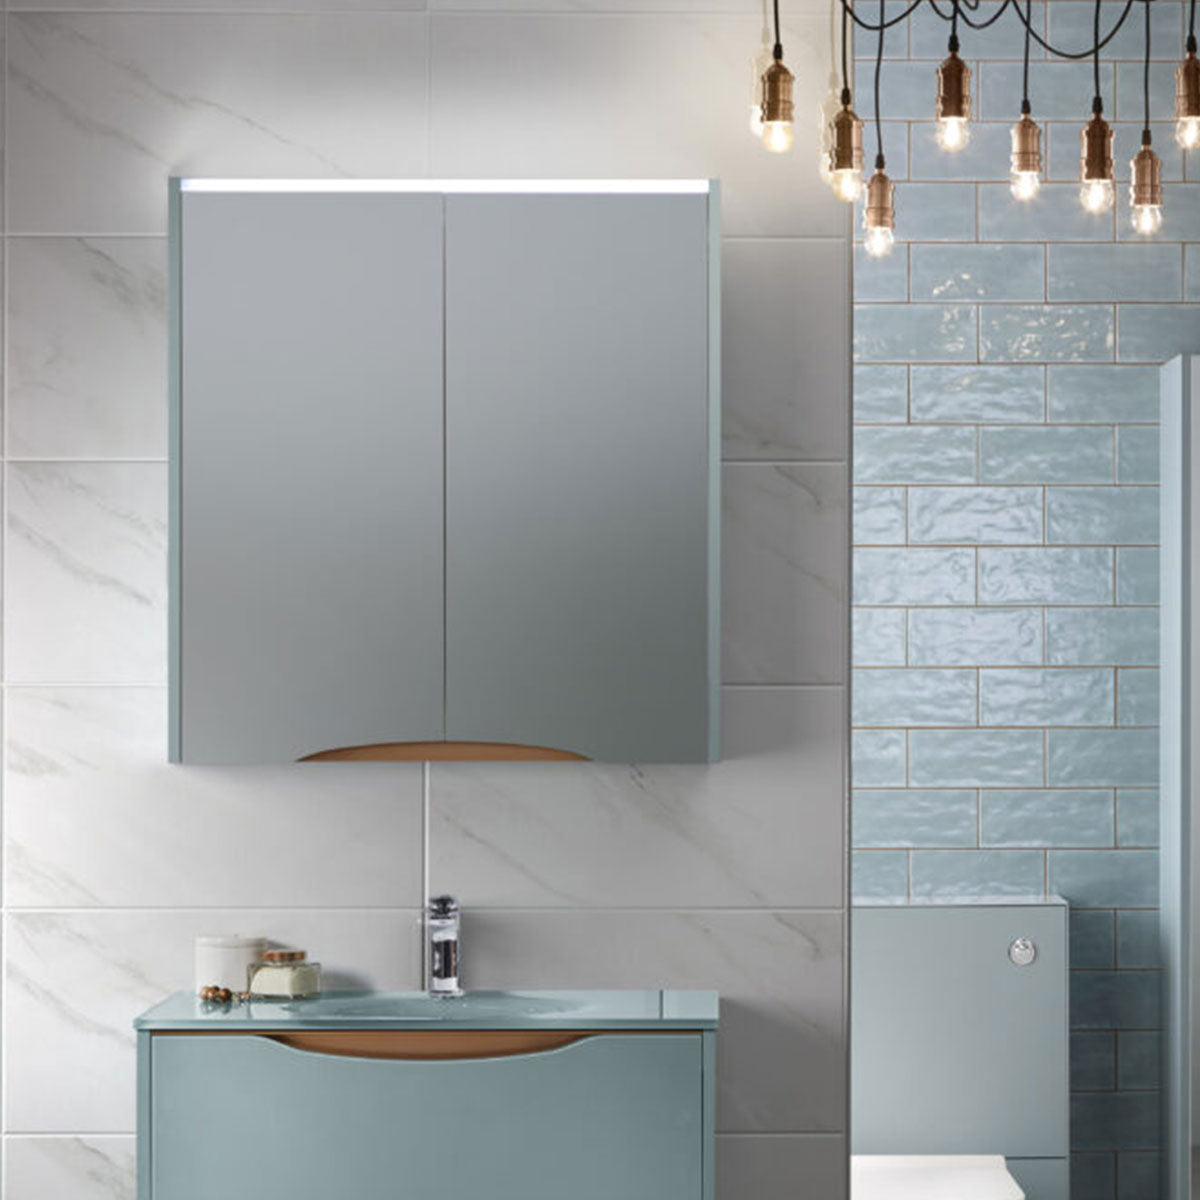 Utopia Lustre Bathroom Mirror Cabinet Wall Hung With LED Illumination and Shaver Socket